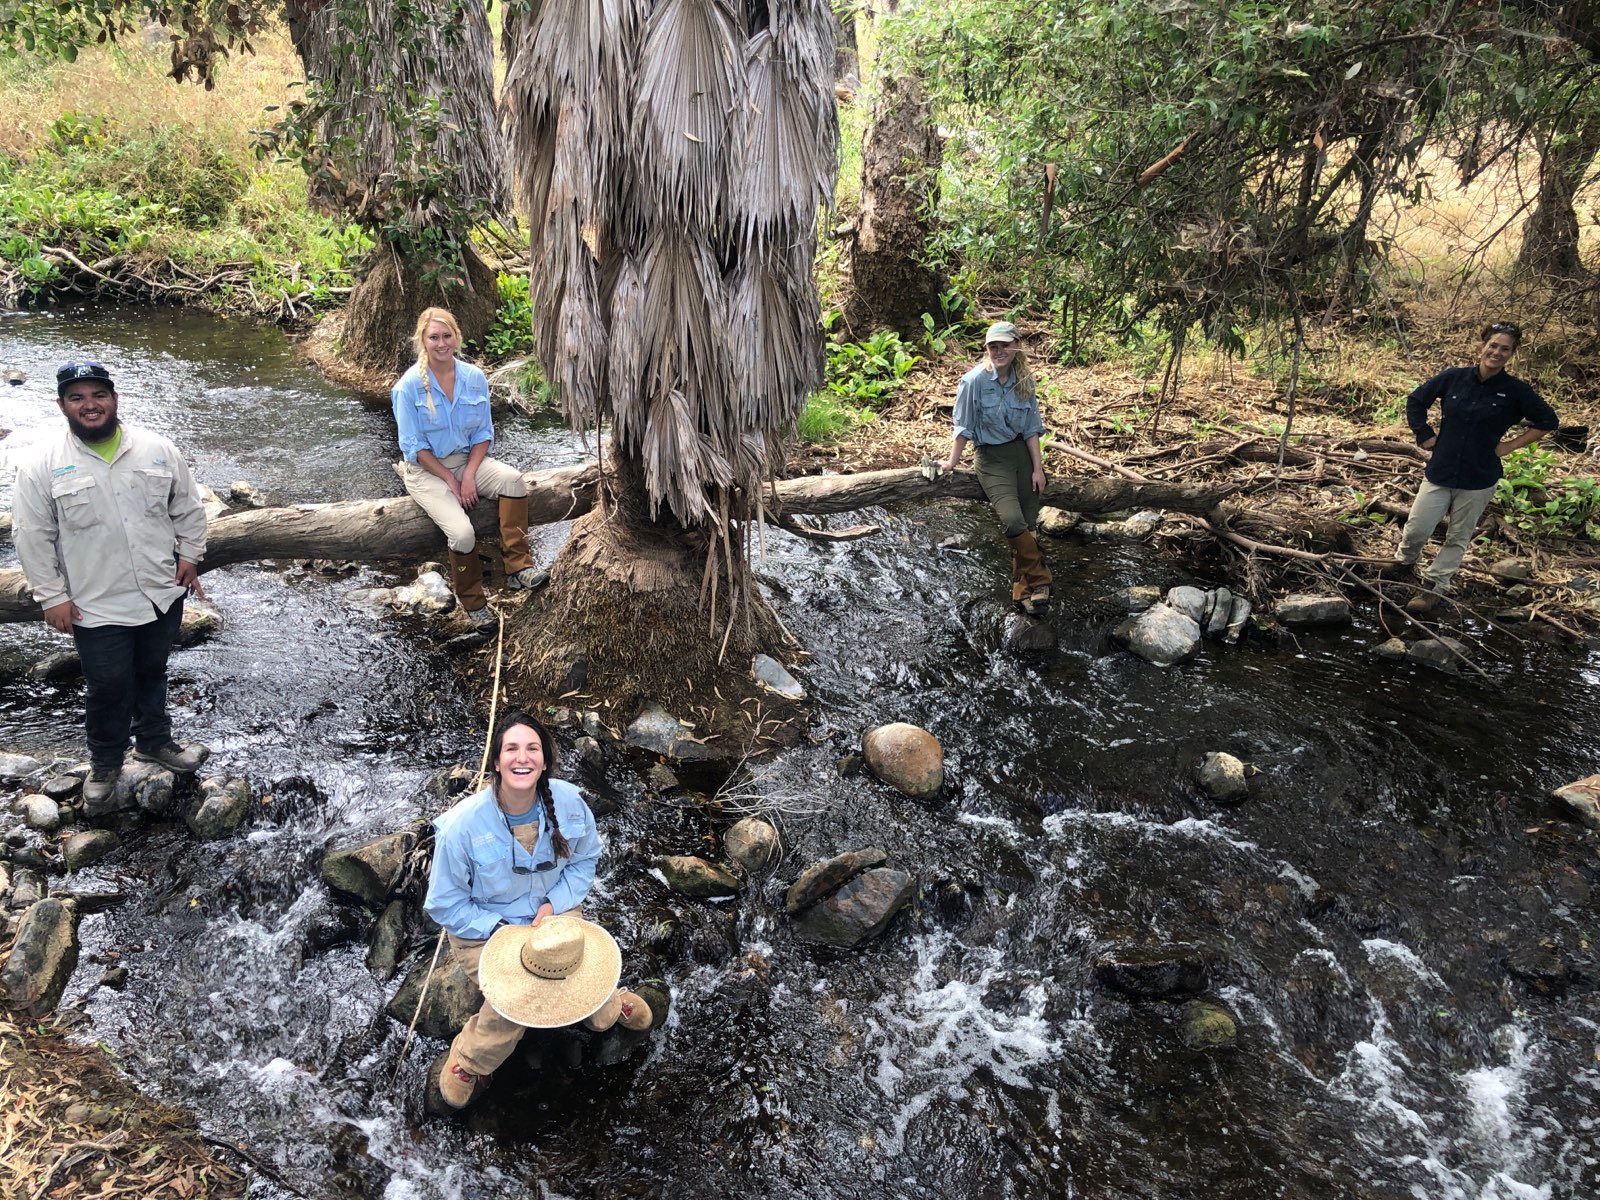 Members of a land conservation team look up at a the camera while standing and sitting on rocks spread across a running creek.